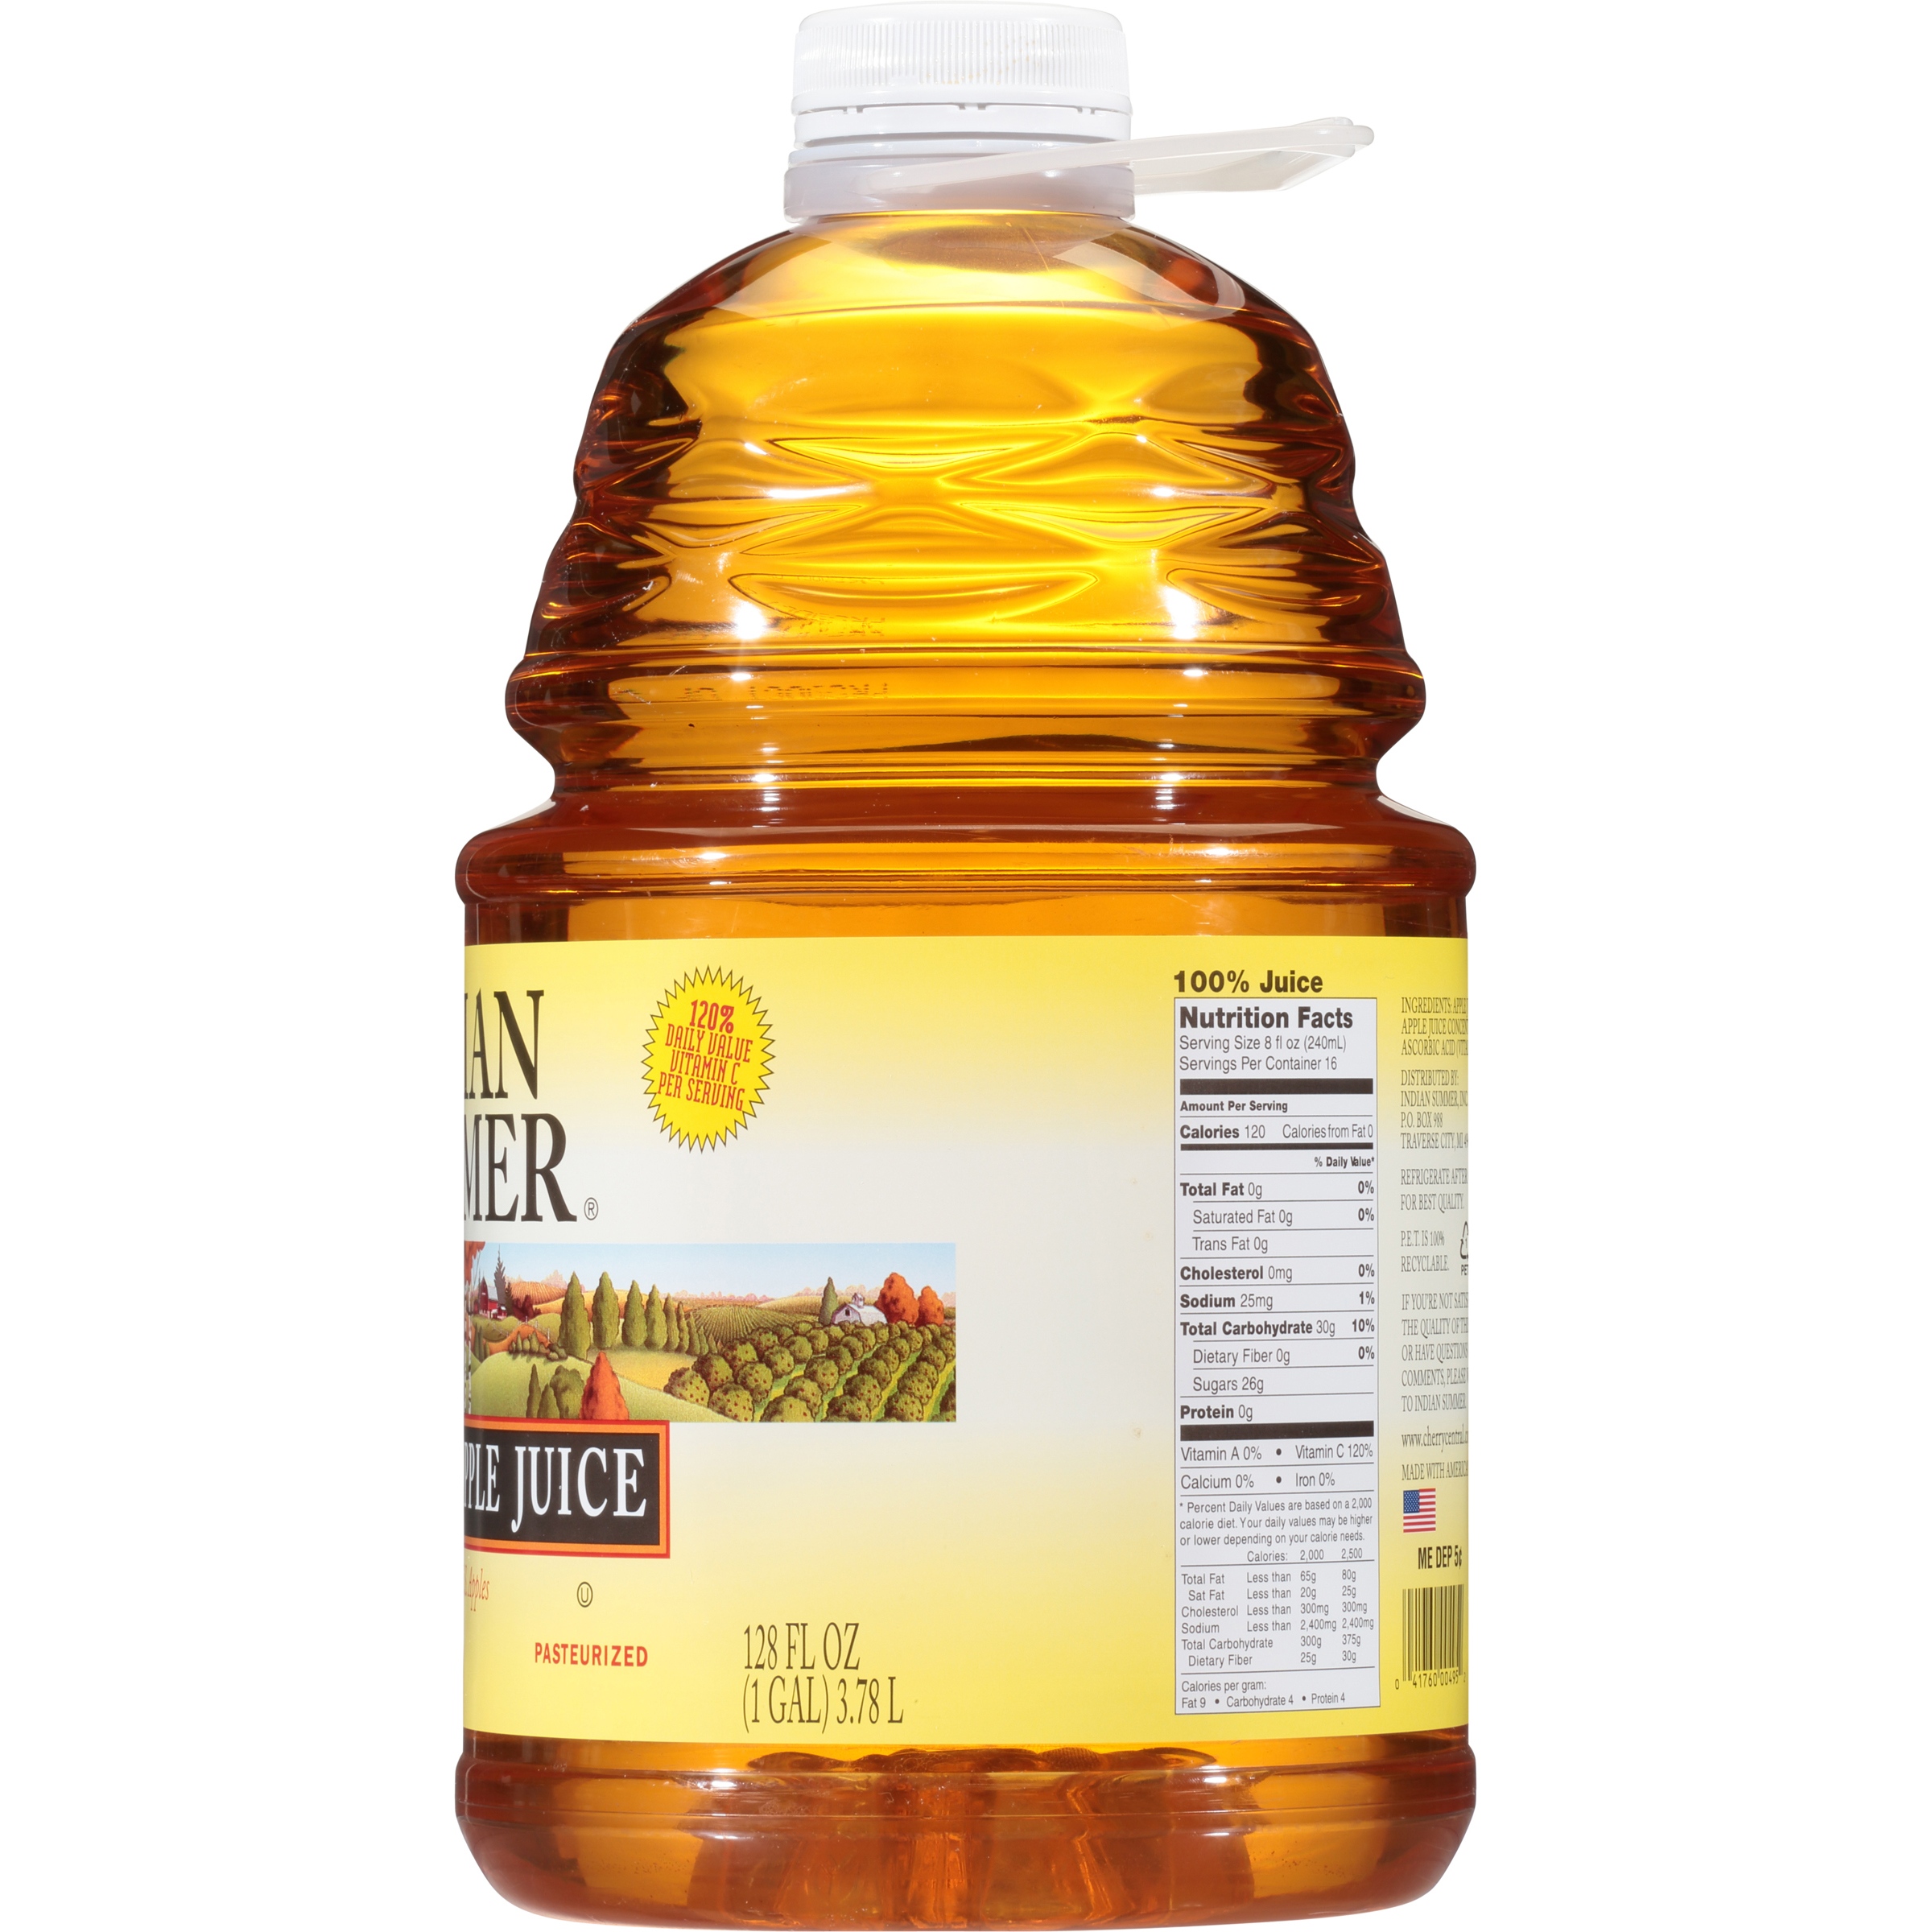 Indian Summer Premium Apple Juice, Made from Fresh Pressed Apples, 128 fl oz - image 4 of 6